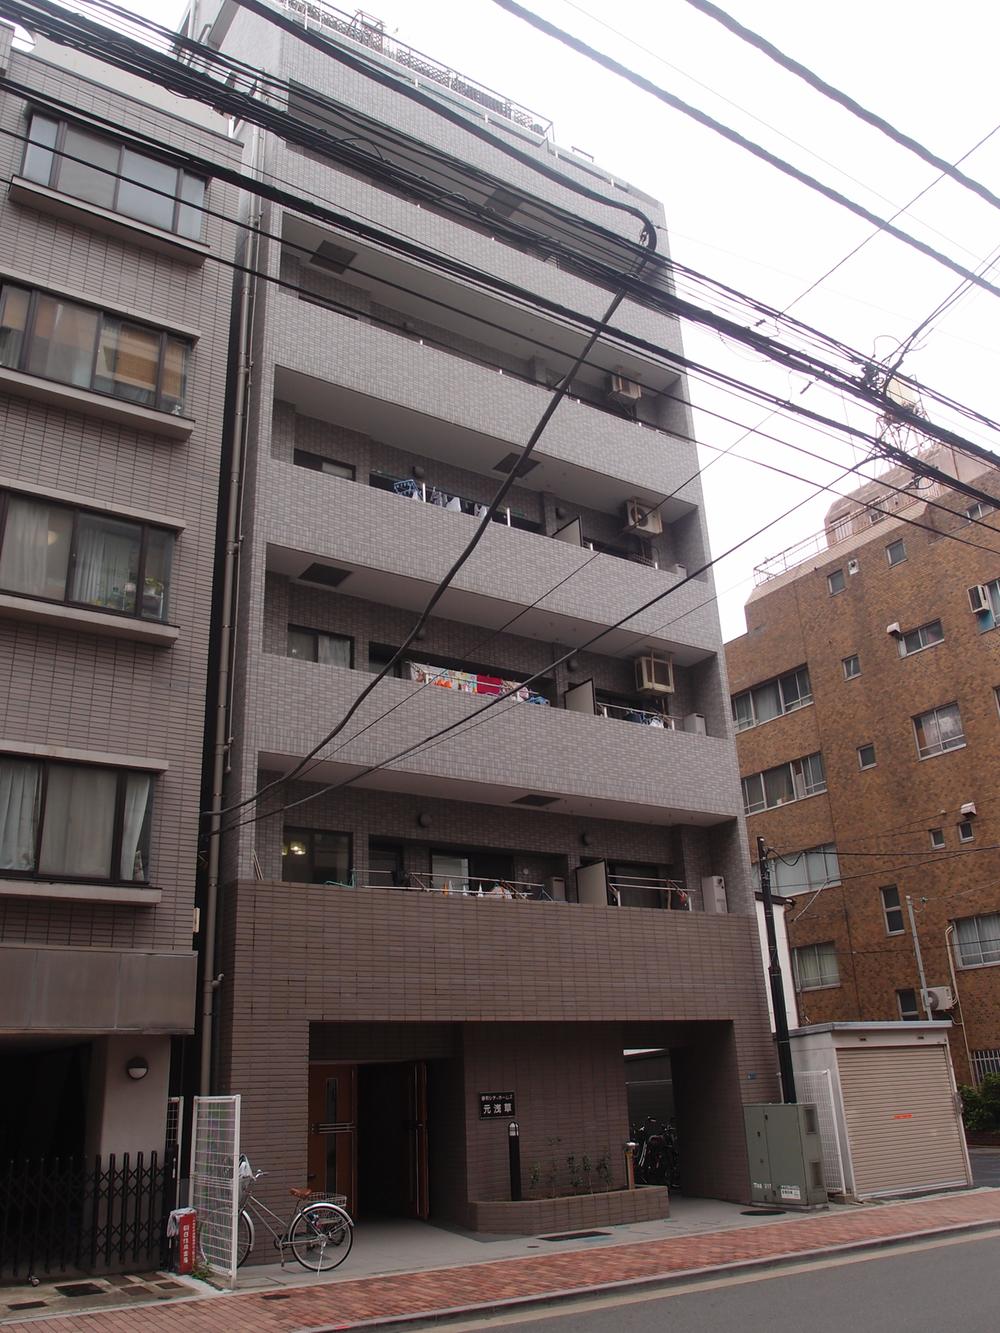 Local appearance photo. Building appearance (2013 October shooting)